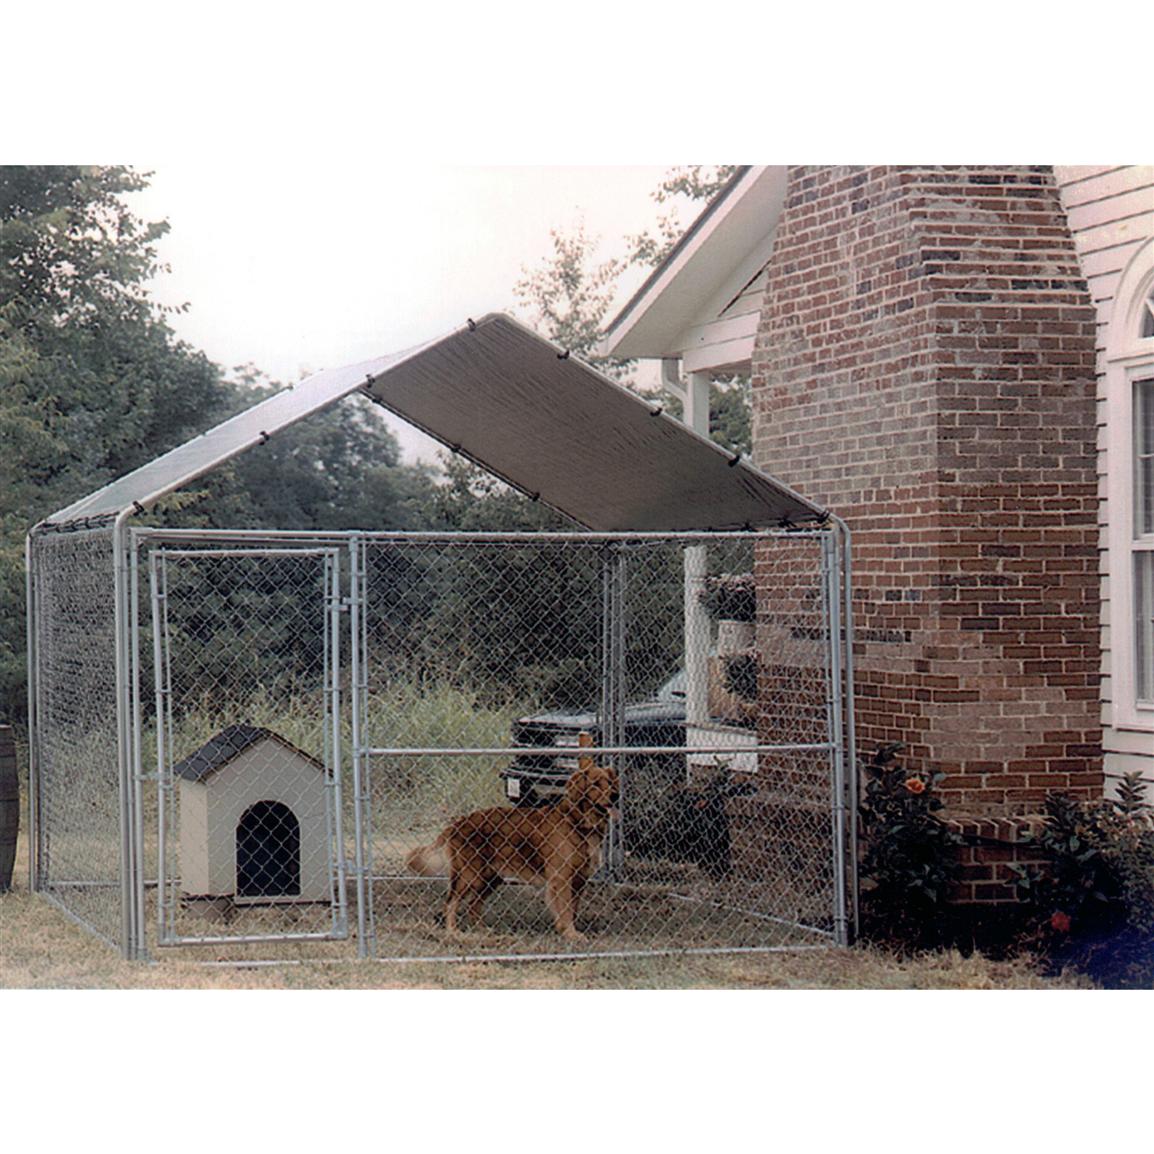 King Canopy 10 x 10' Low Pitch Kennel Cover, Silver 93612, Canopy, Screen & Pop Up Tents at